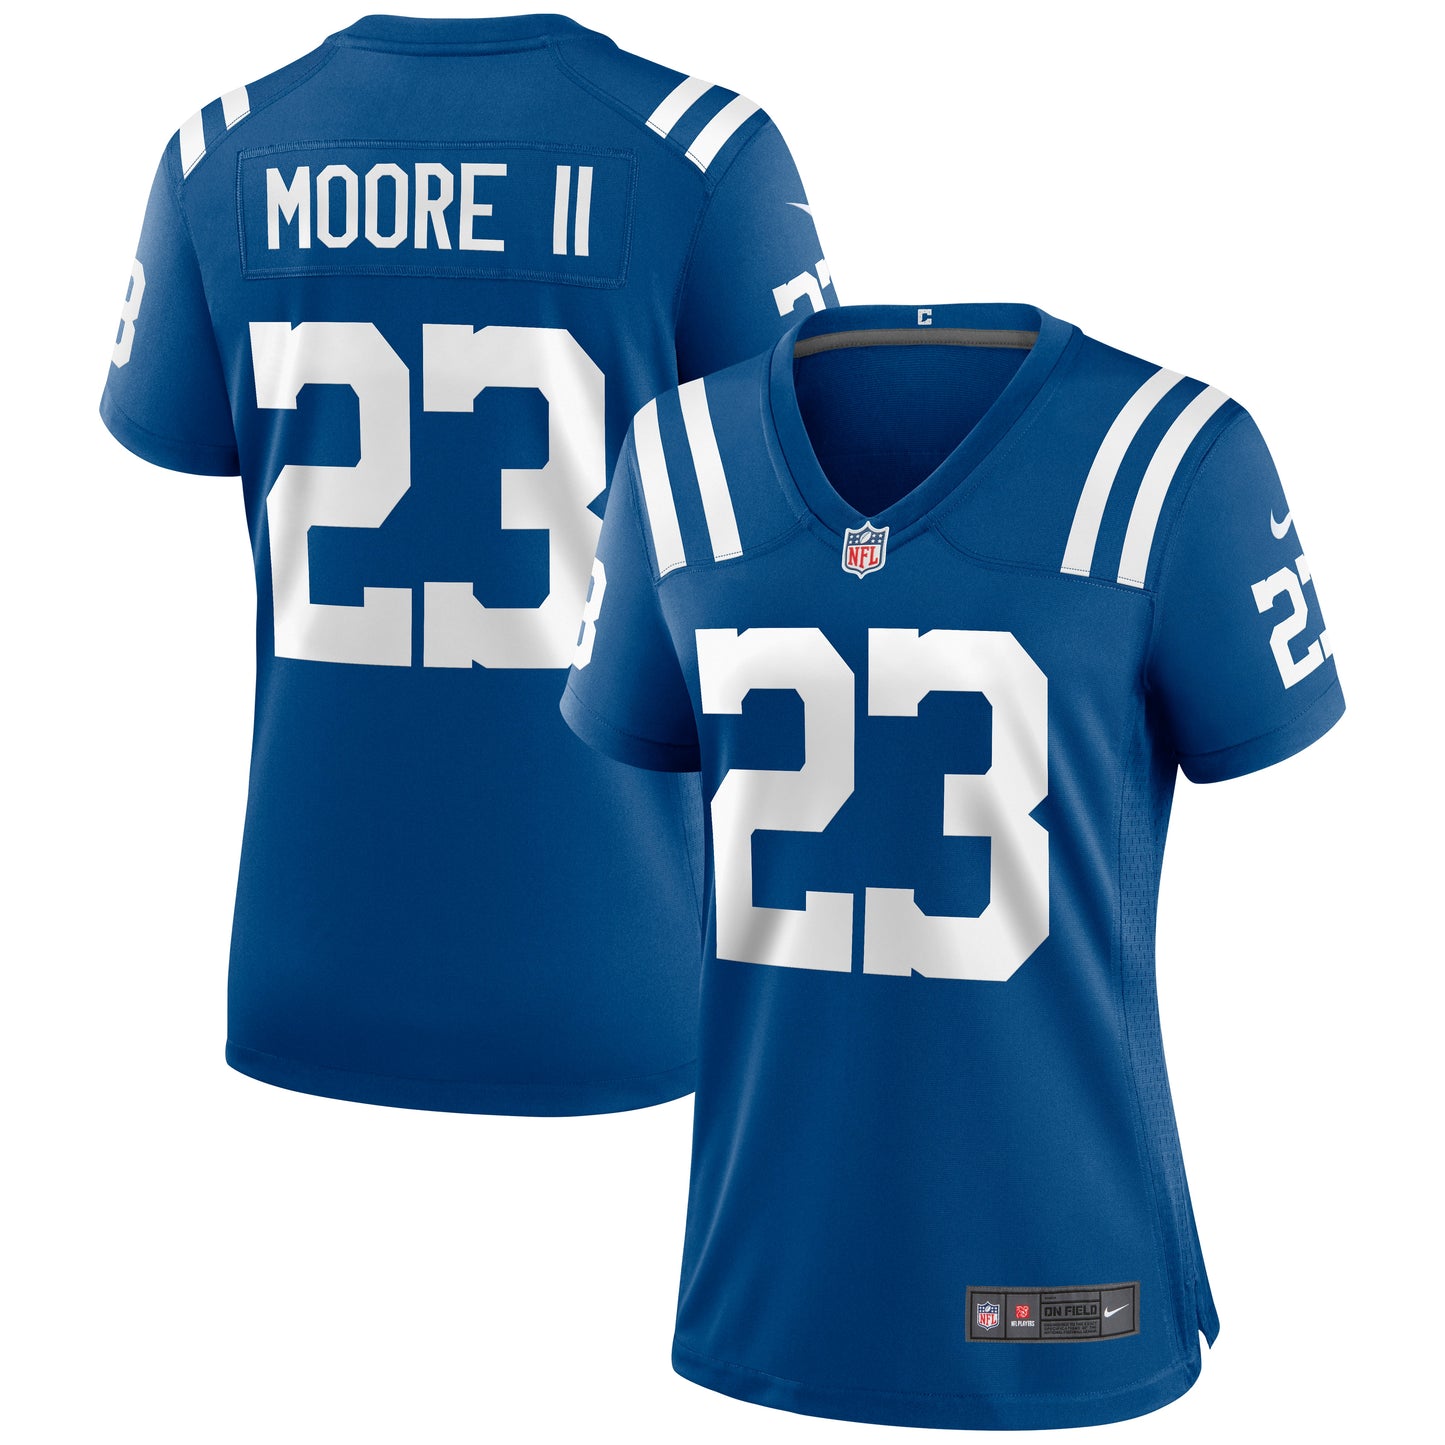 Kenny Moore II Indianapolis Colts Nike Women's Game Jersey - Royal